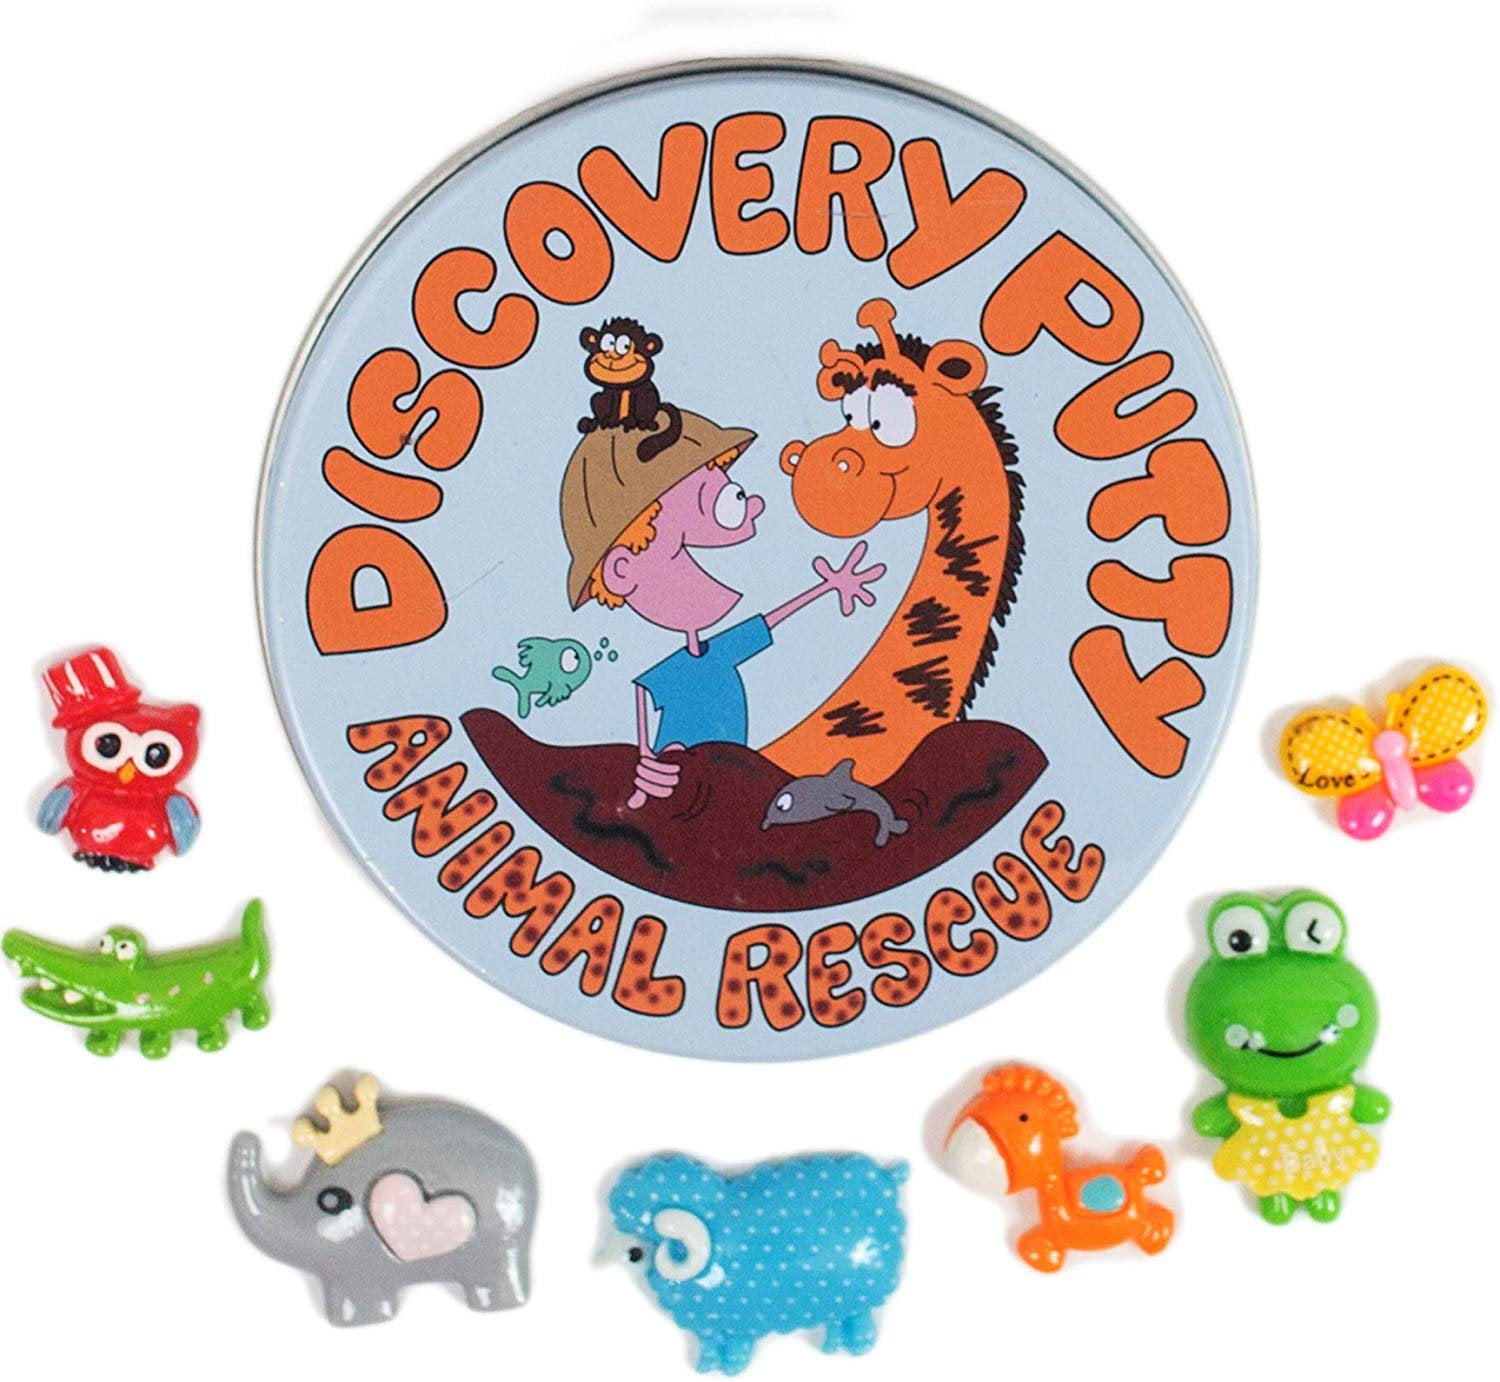 Extra Soft Resistance Fun and Function Kids Discovery Putty Dino Dig 